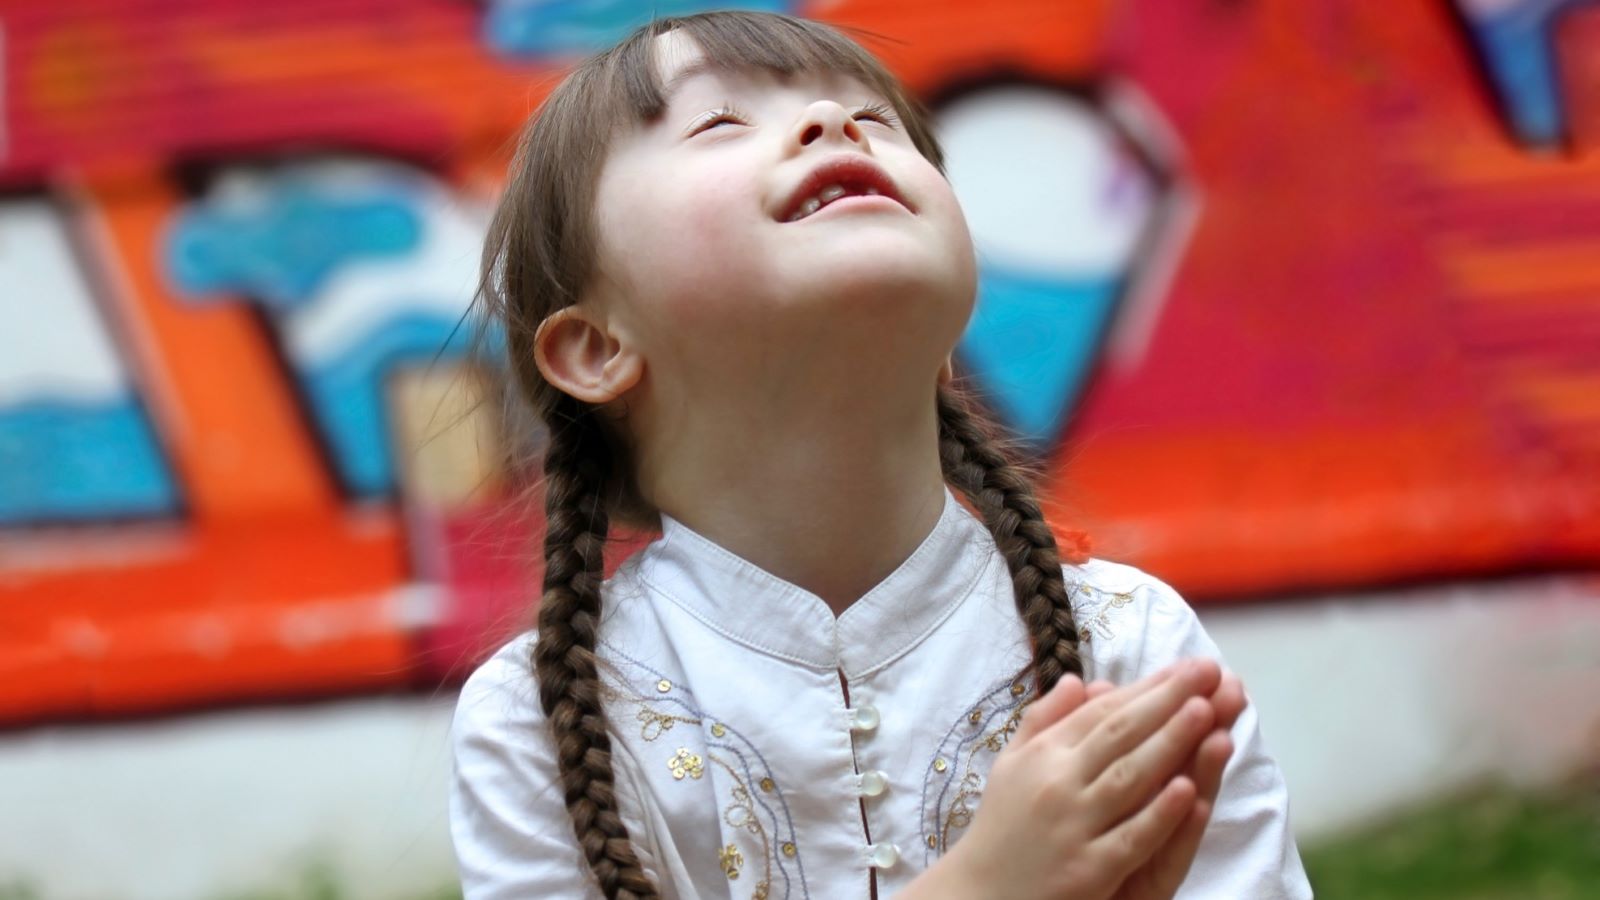 A child with Down Syndrome looks heavenward as she folds her hands in prayer